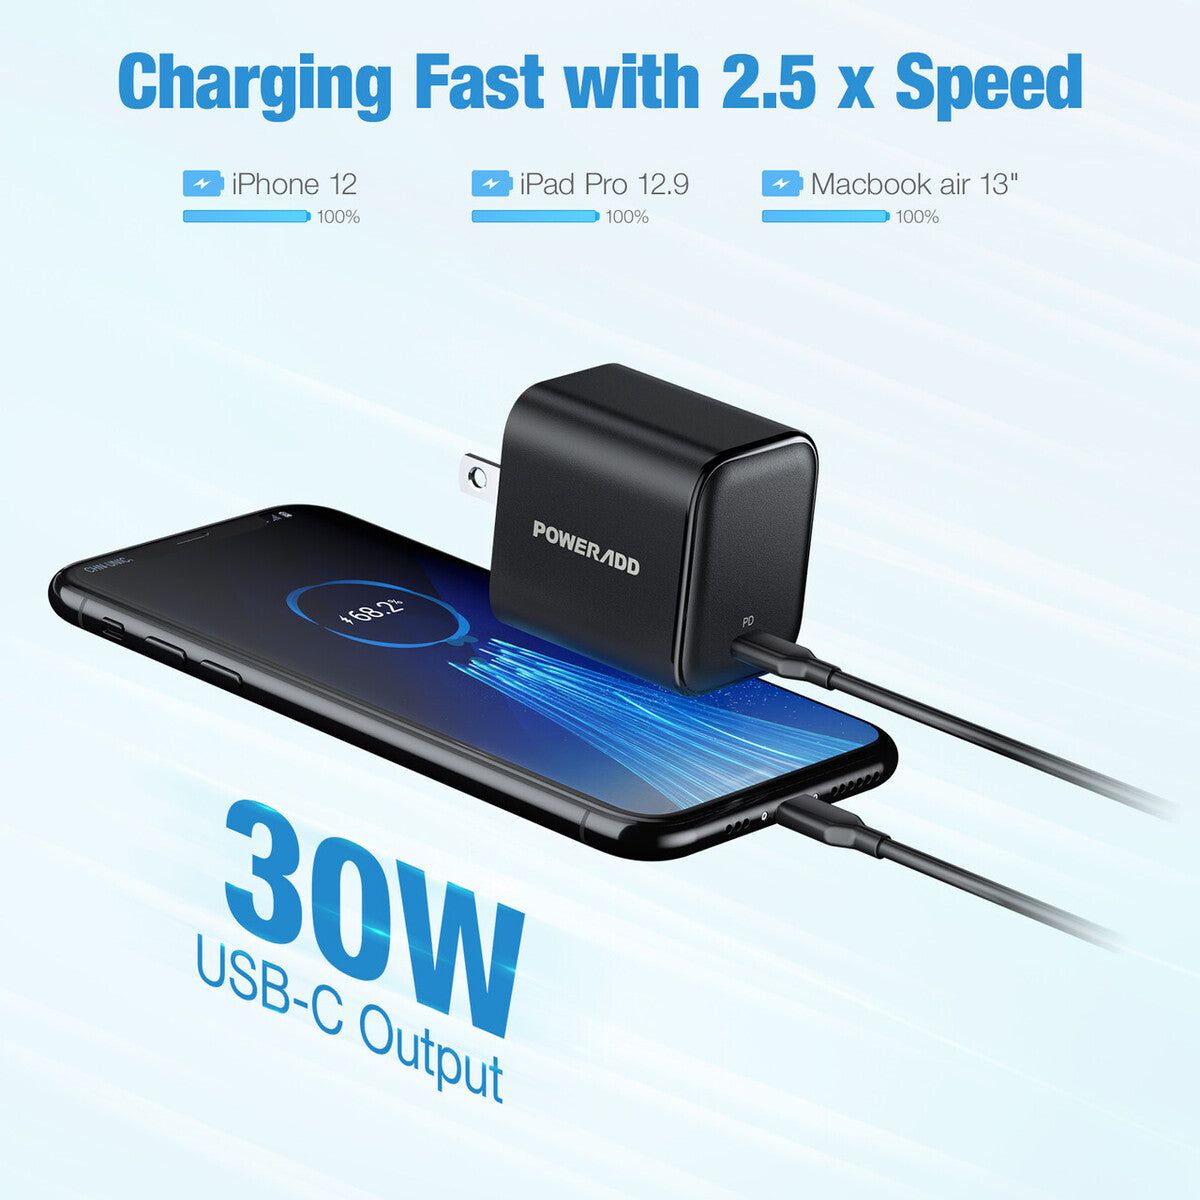 POWERADD 30W 【GaN 】Compact USB-C Wall Charger with Power Delivery, For iPhone 12 / Mini/Pro/Pro Max / 11 / X/XS/XR, iPad Pro, Nintendo Switch ect